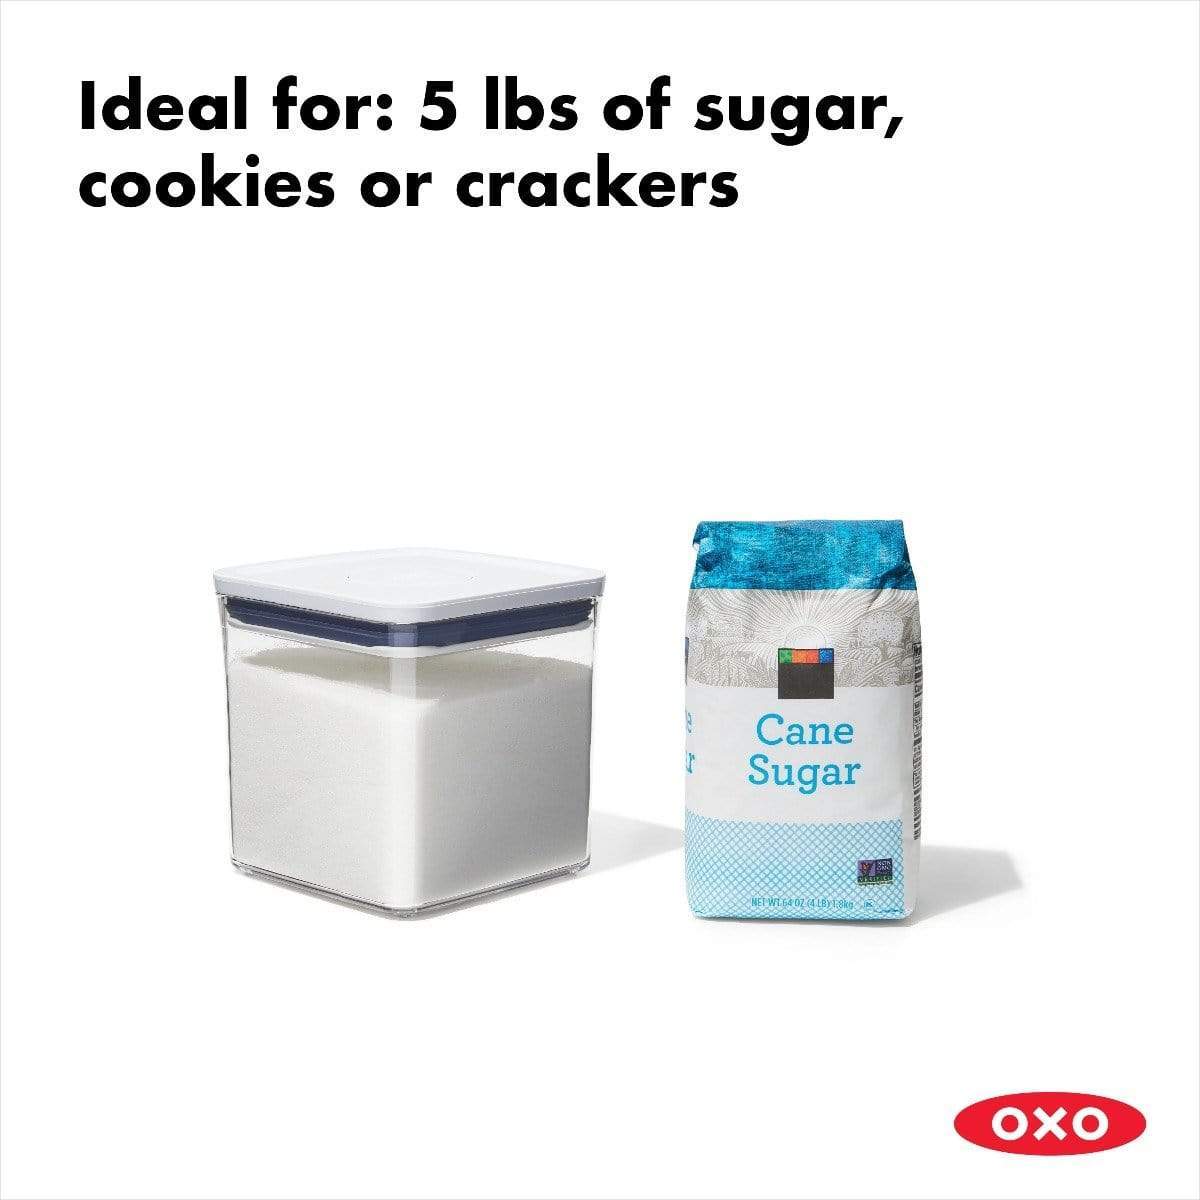 https://cdn.shopify.com/s/files/1/0474/2338/9856/products/oxo-oxo-2-8-qt-pop-square-canister-38864-29724645785760_1600x.jpg?v=1628337545